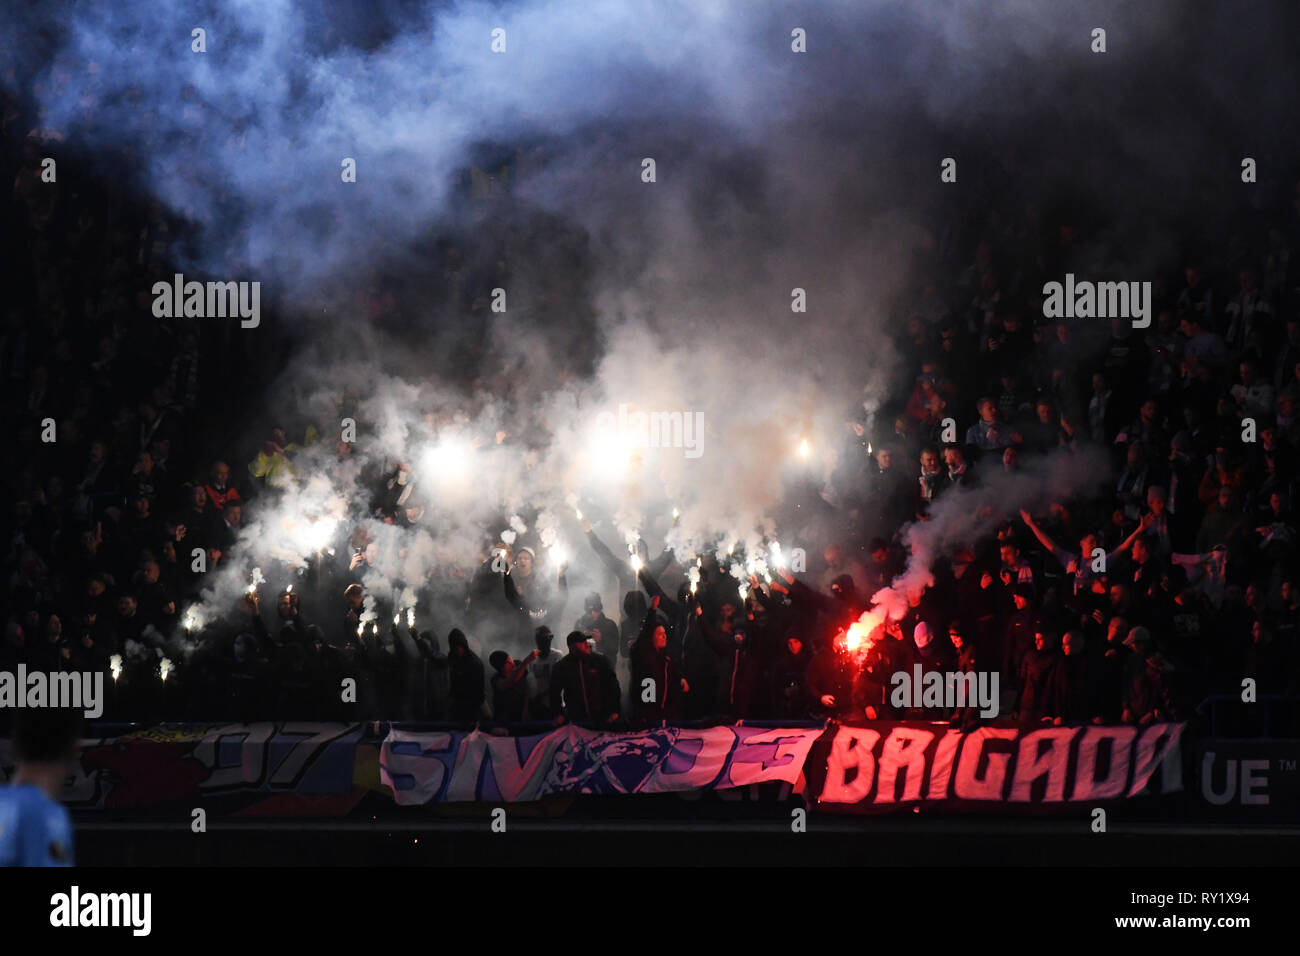 LONDON, ENGLAND - FEBRUARY 21, 2019: Malmo ultras light flares during the second leg of the 2018/19 UEFA Europa League Round of 32 game between Chelsea FC (England) and Malmo FF (Sweden) at Stamford Bridge. Stock Photo